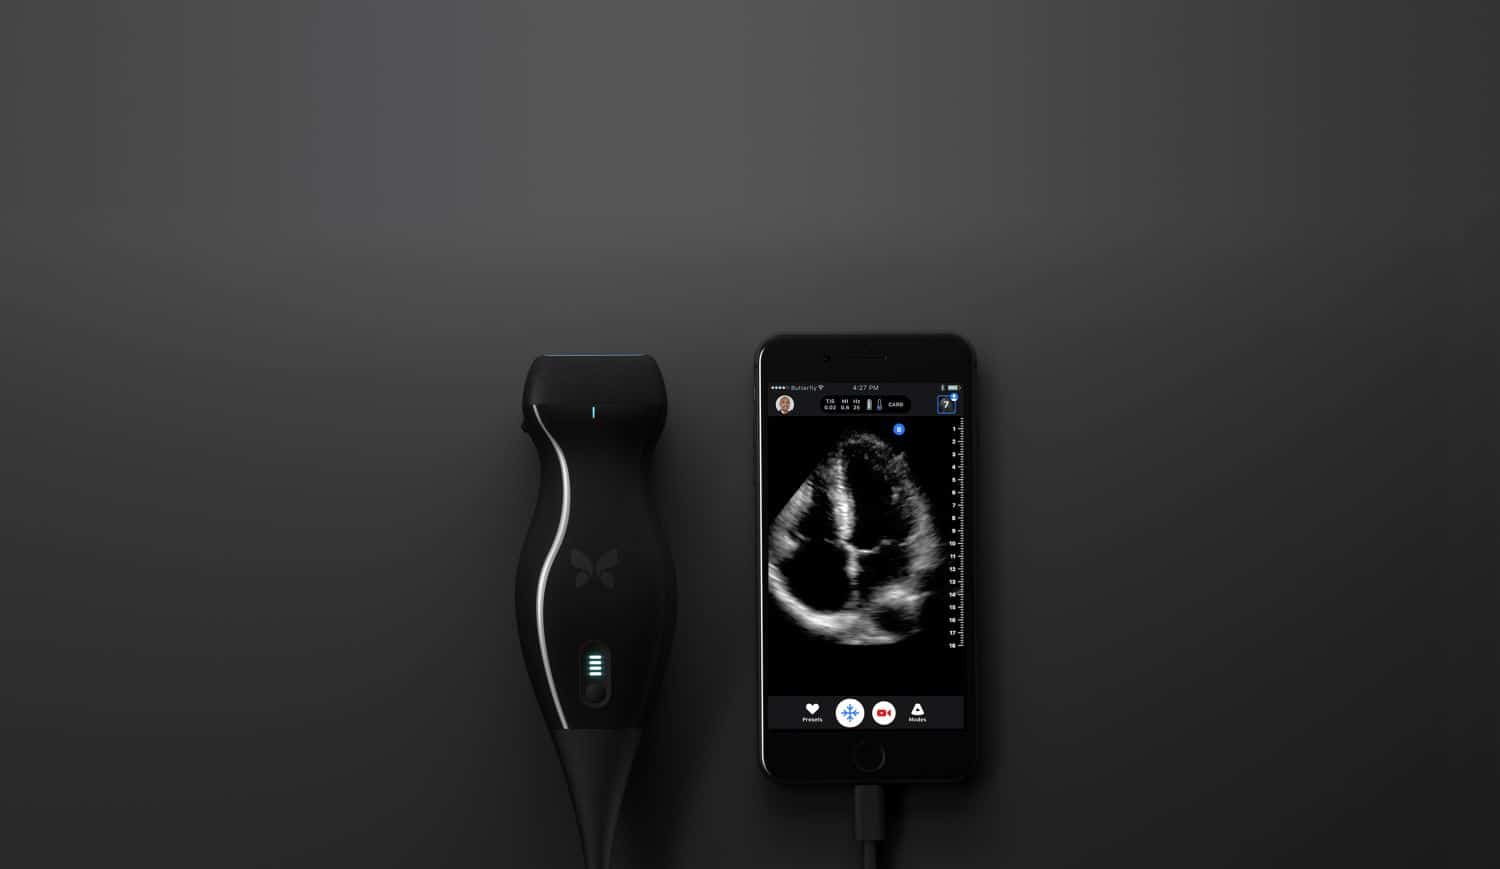 Ultrasound machine with iPhone